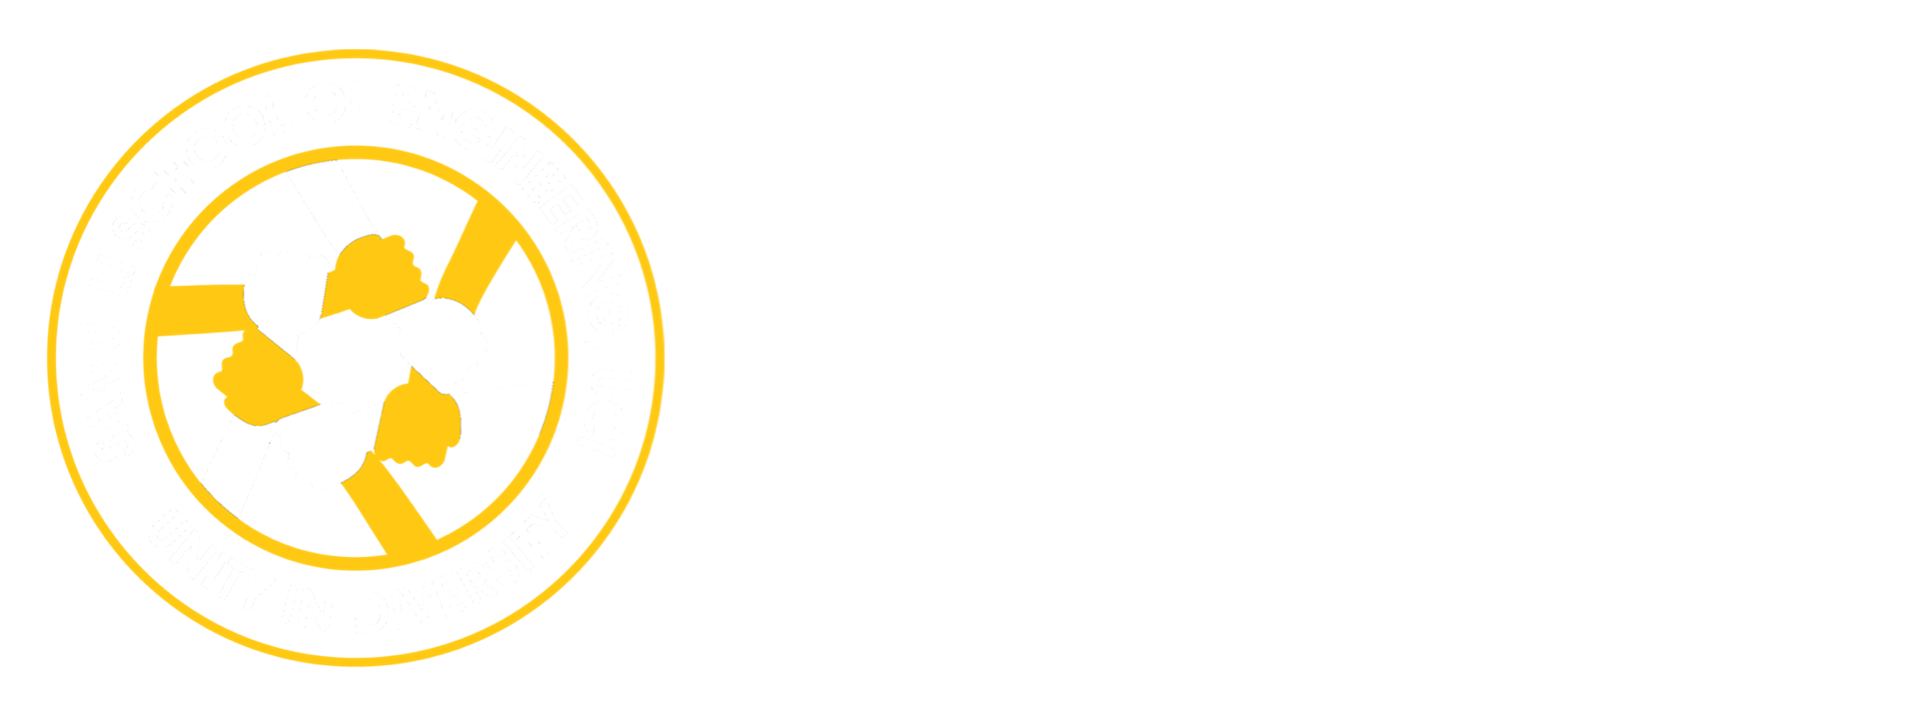 IDEAA - Inclusion, Diversity, Equity, Anti-Racism, Access